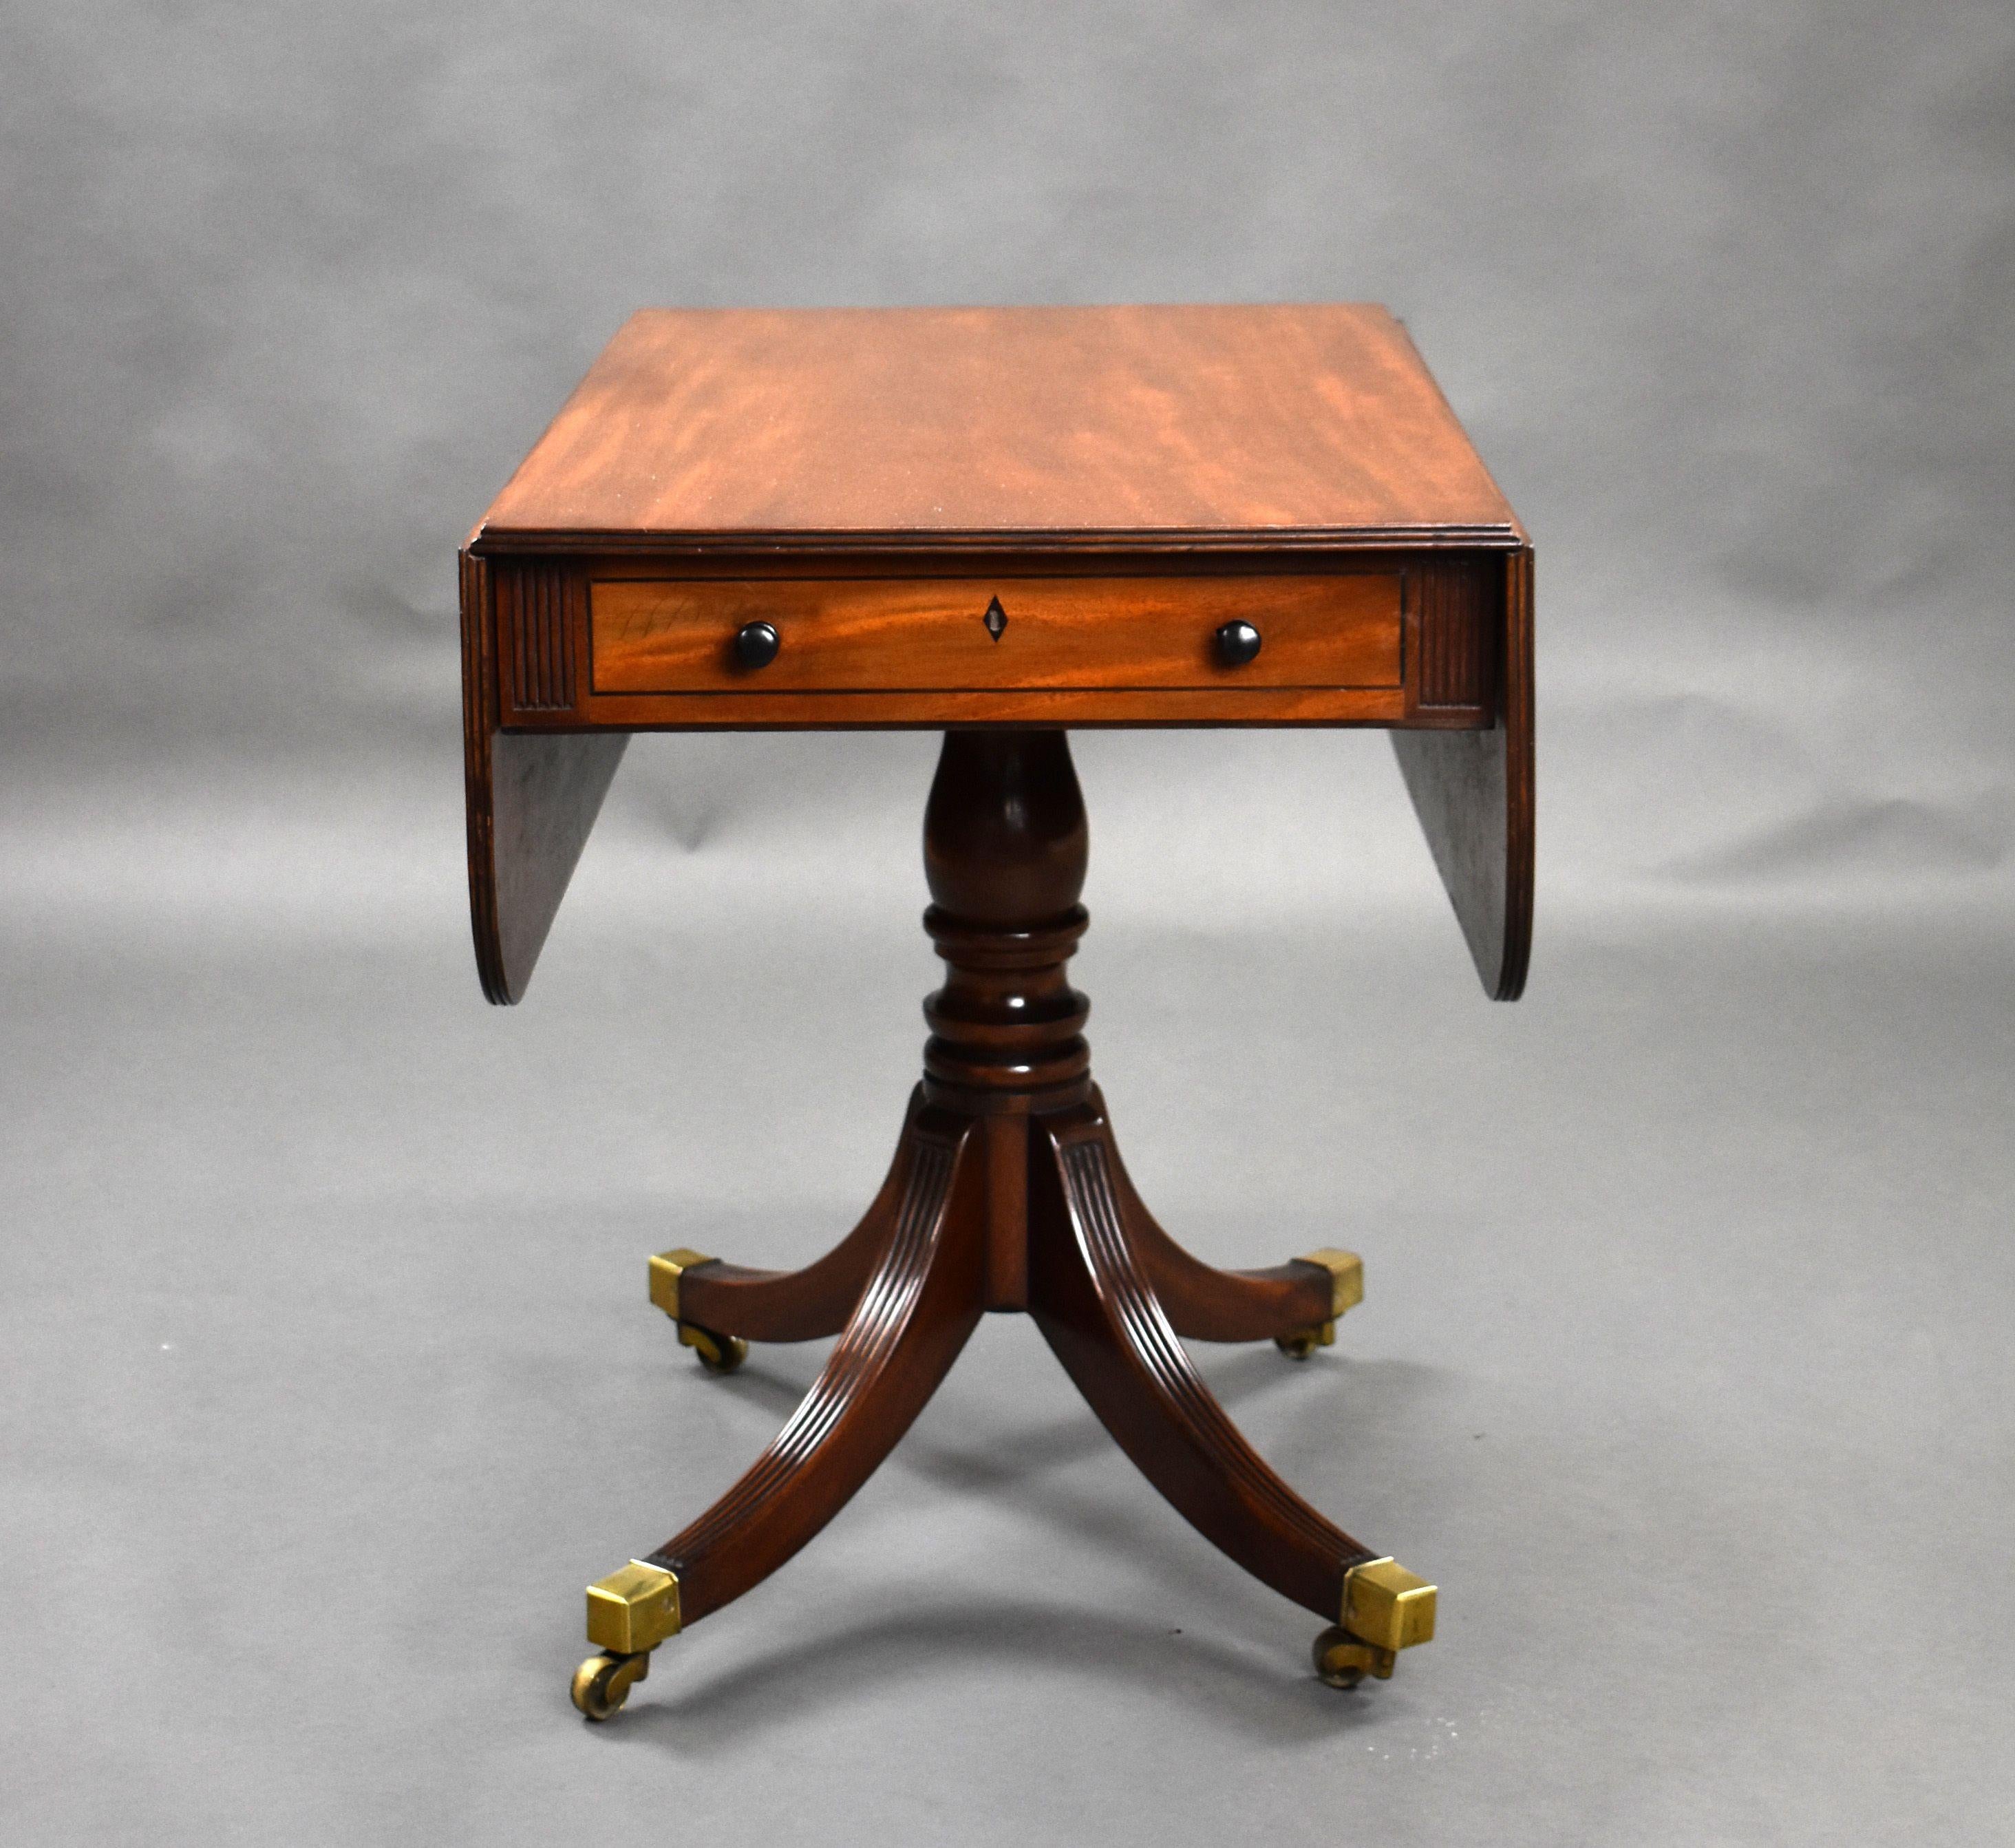 For sale is a Regency mahogany Pembroke table, in very good condition for its age.
Width: 91cm Depth: 55cm Height: 72cm Open: 106cm